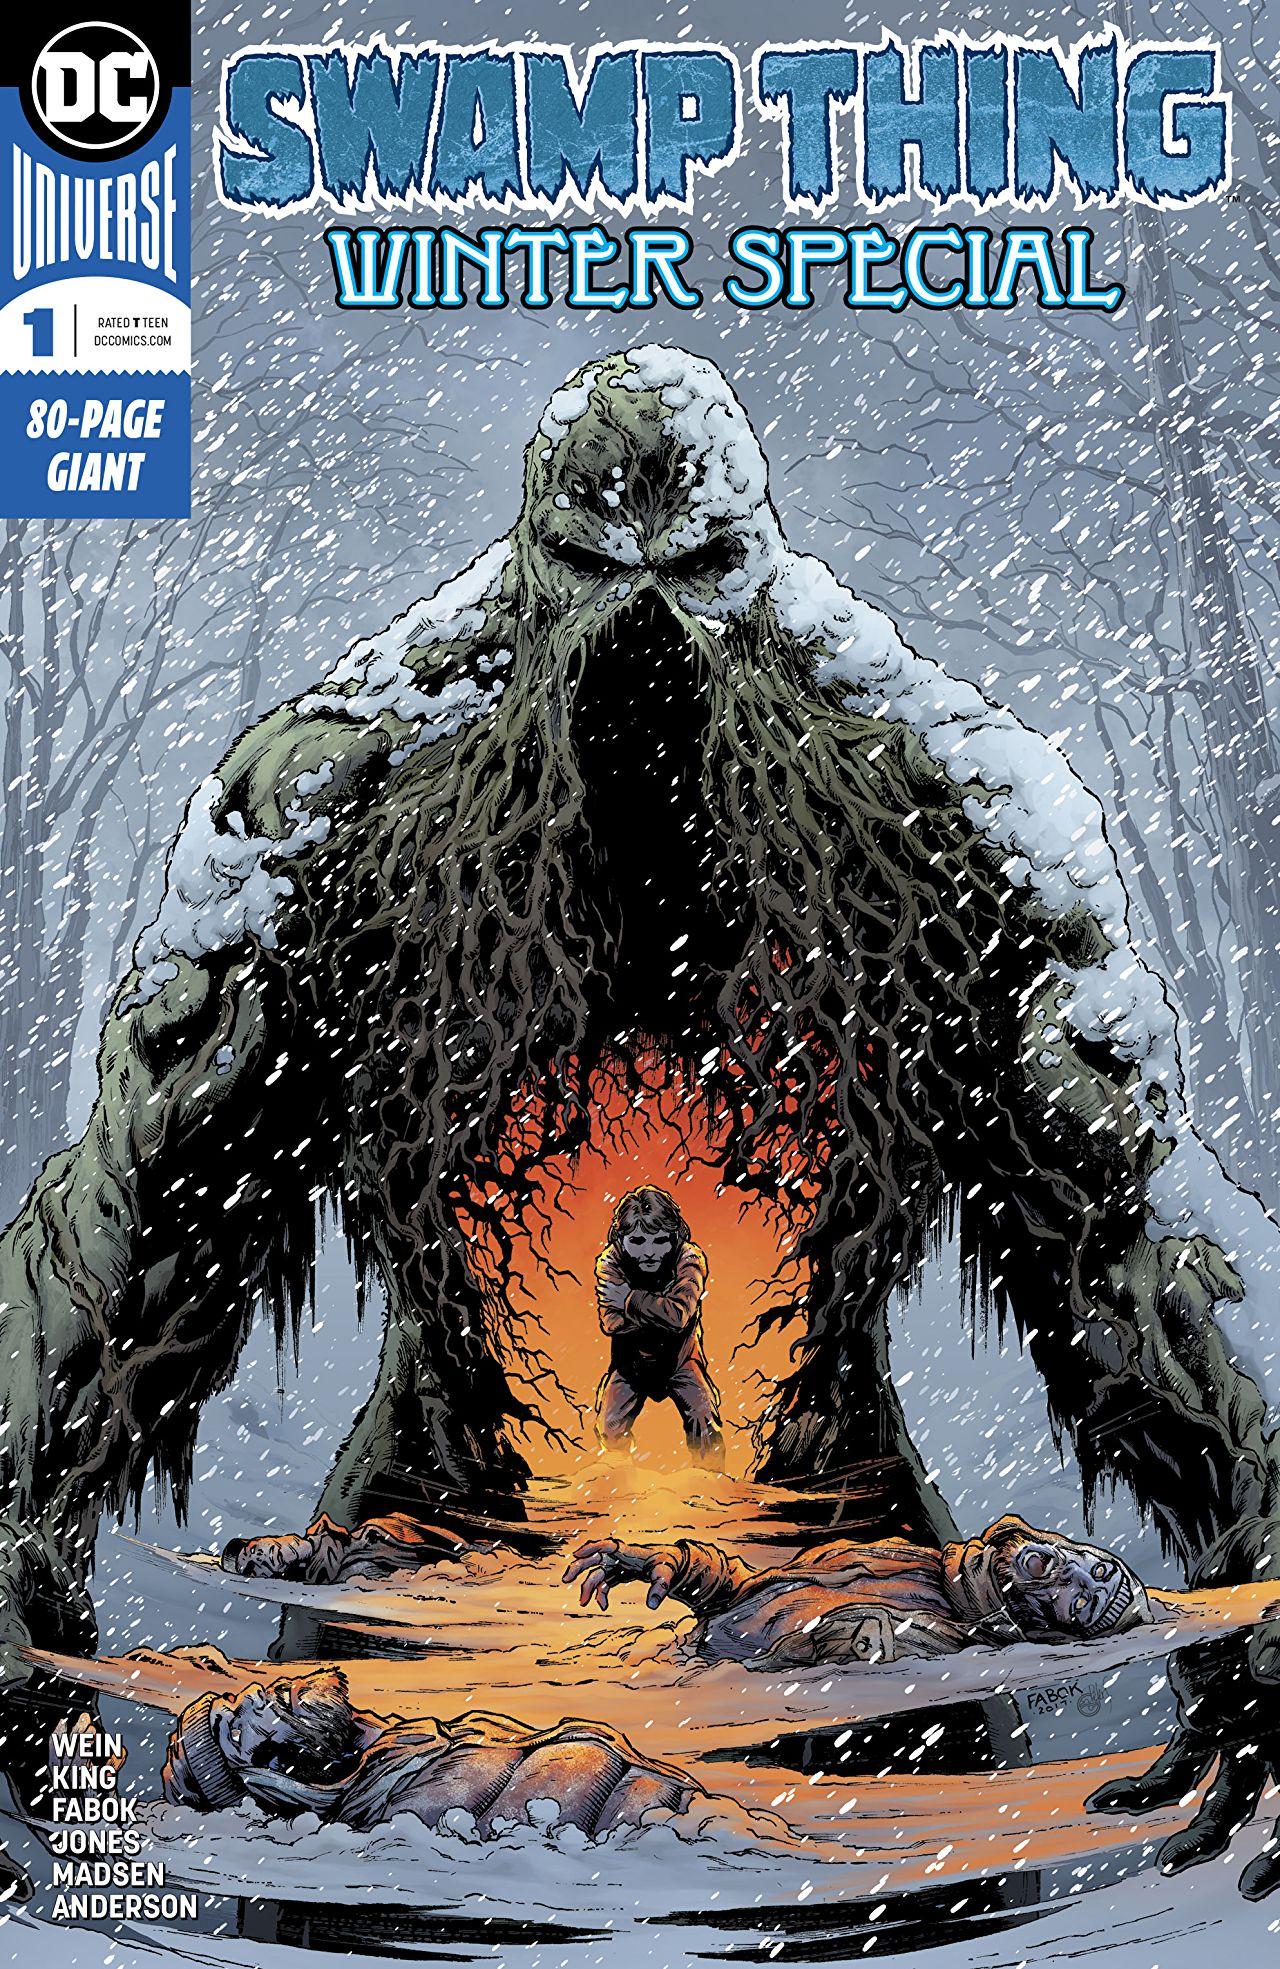 Swamp Thing Winter Special Vol. 1 #1